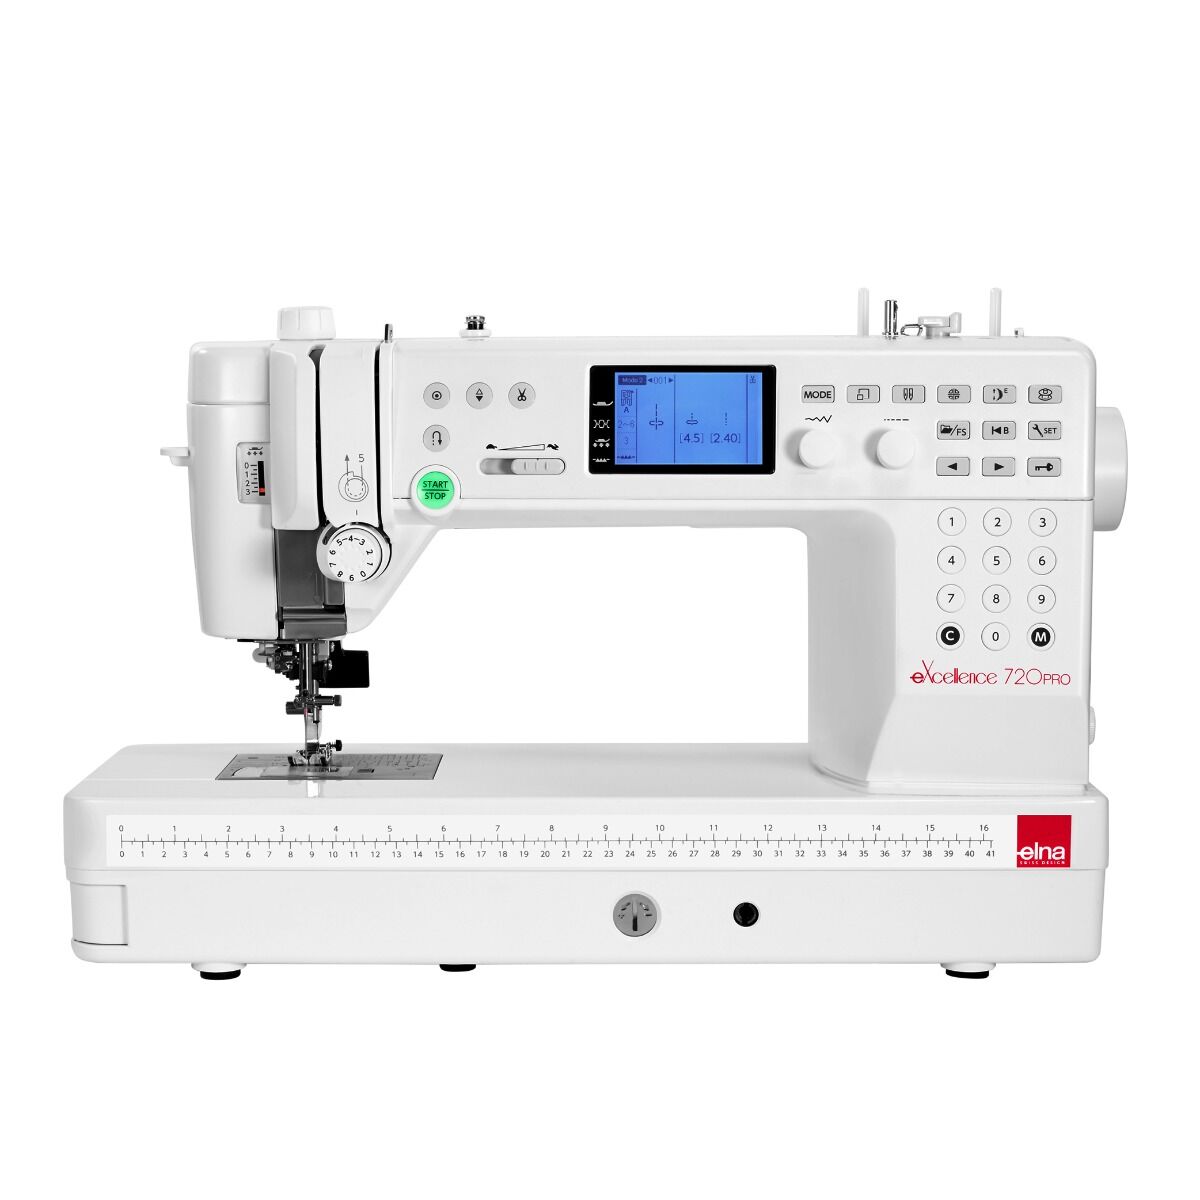 Elna eXcellence 720 Pro Sewing Machine